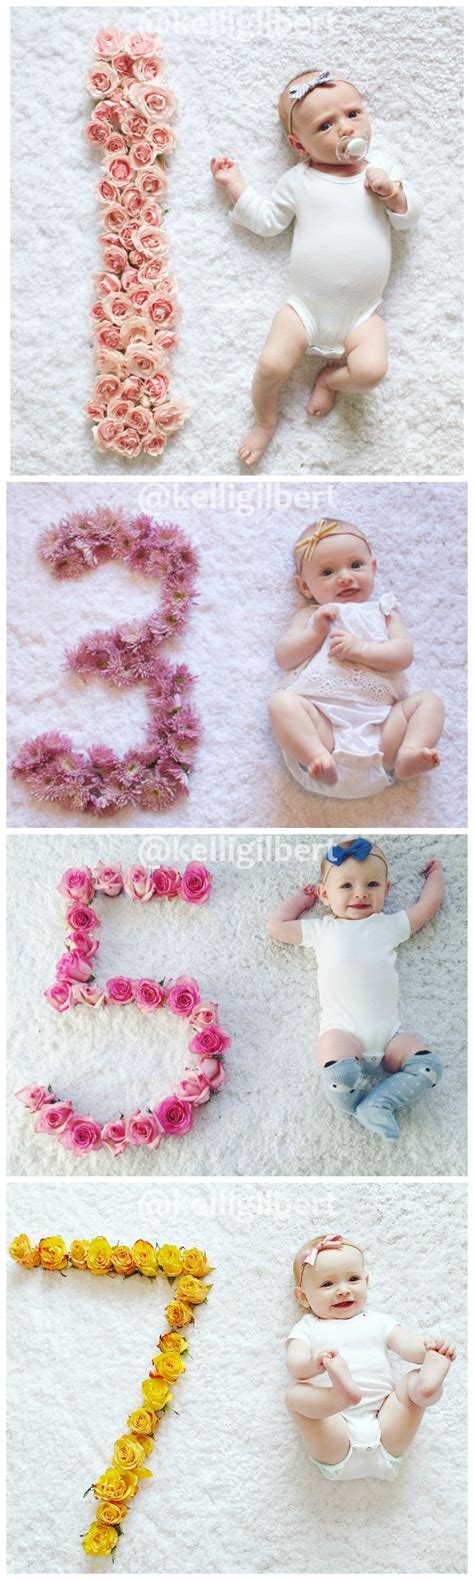 Try These Monthly Baby Photo Ideas If Youre A First Time Mom Love